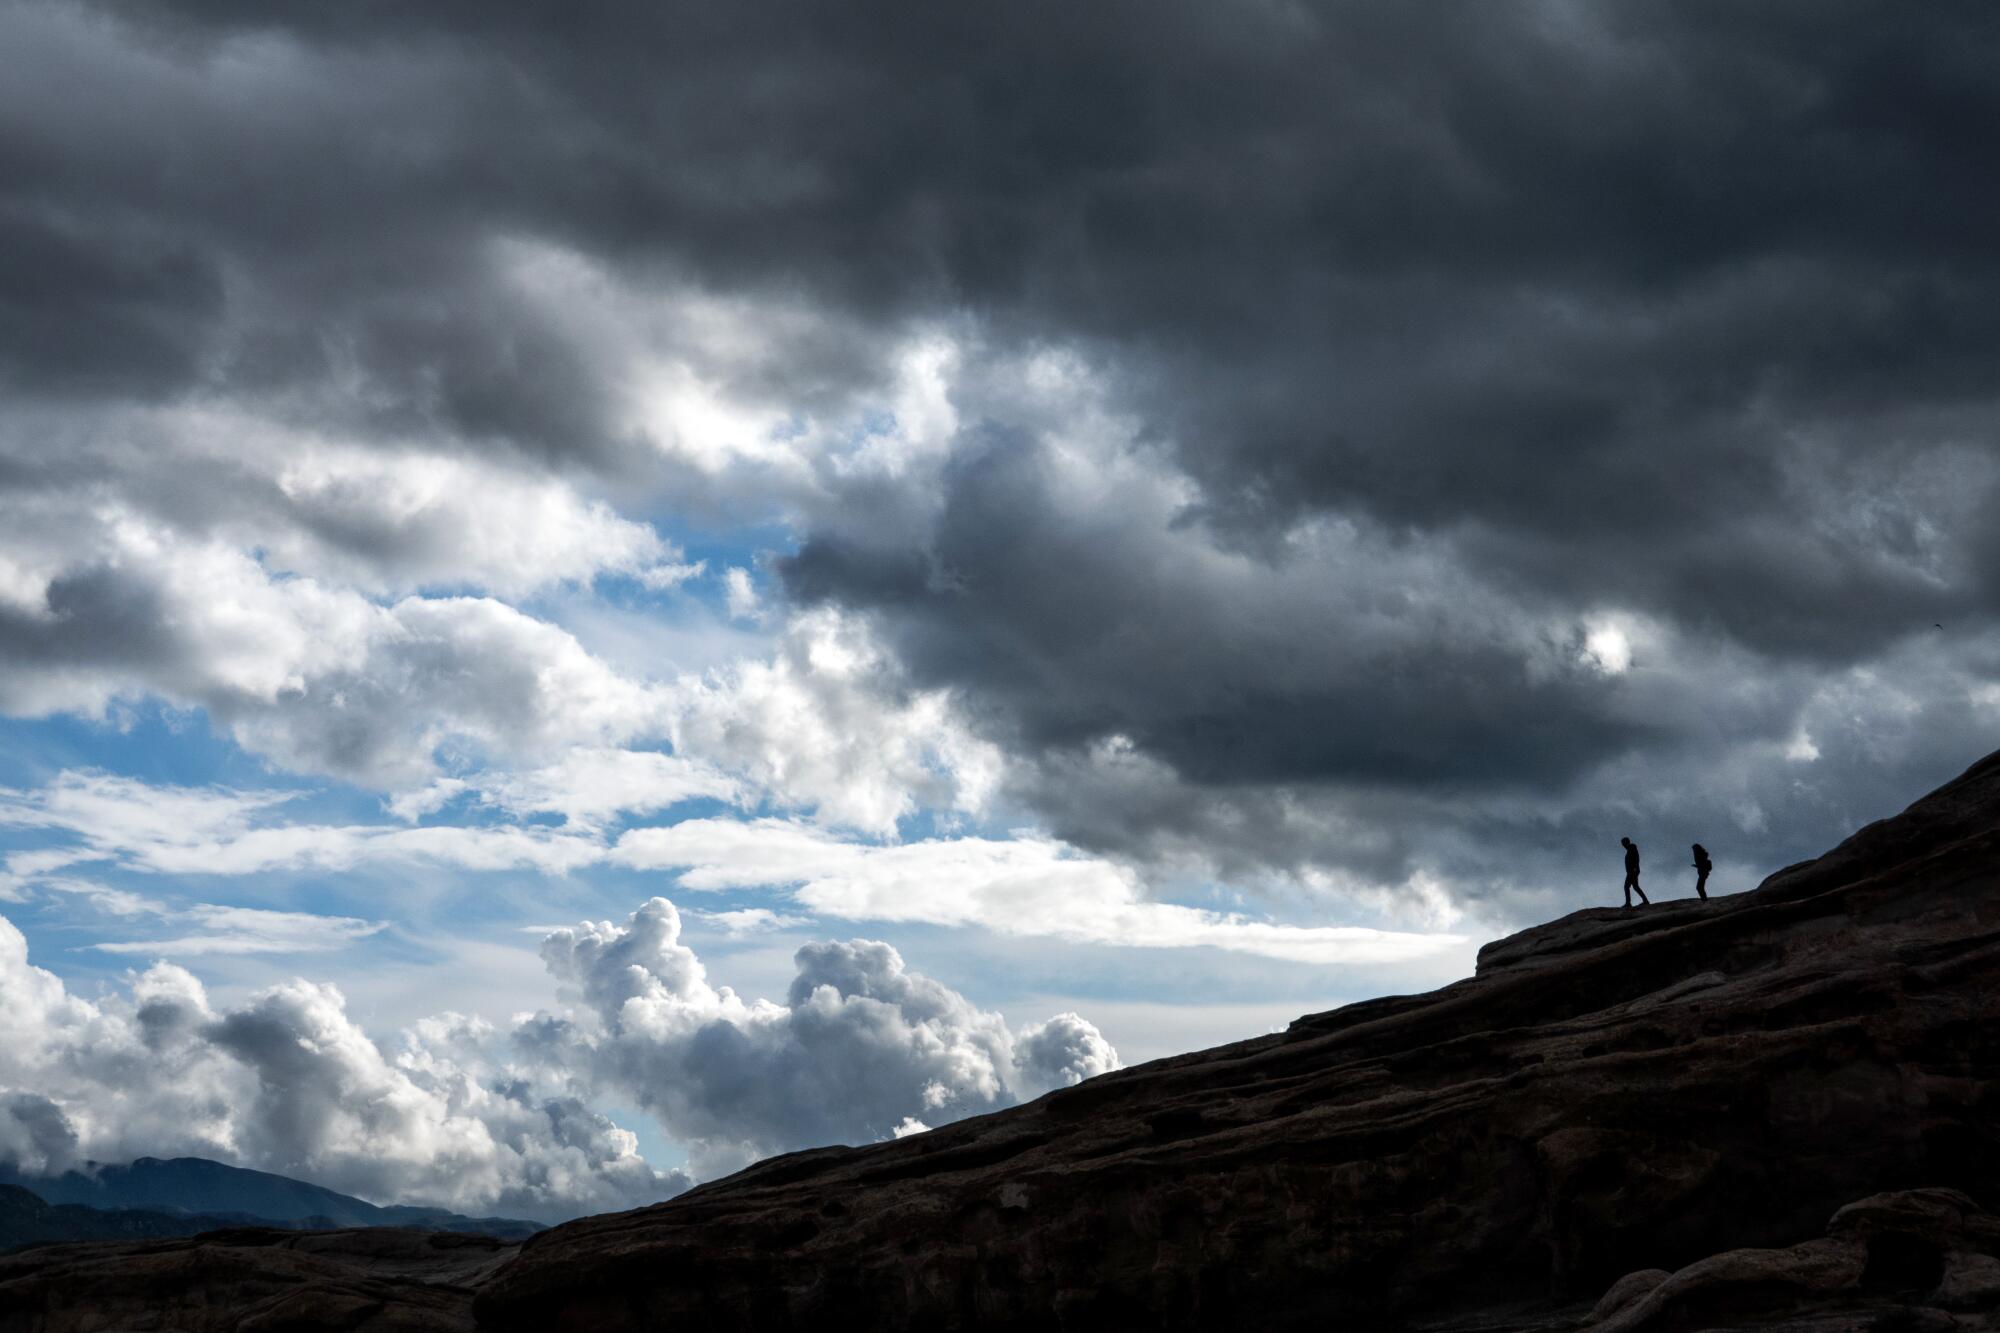 Two small figures standing on dark rocky terrain are silhouetted against a sky of heavy and fluffy clouds.